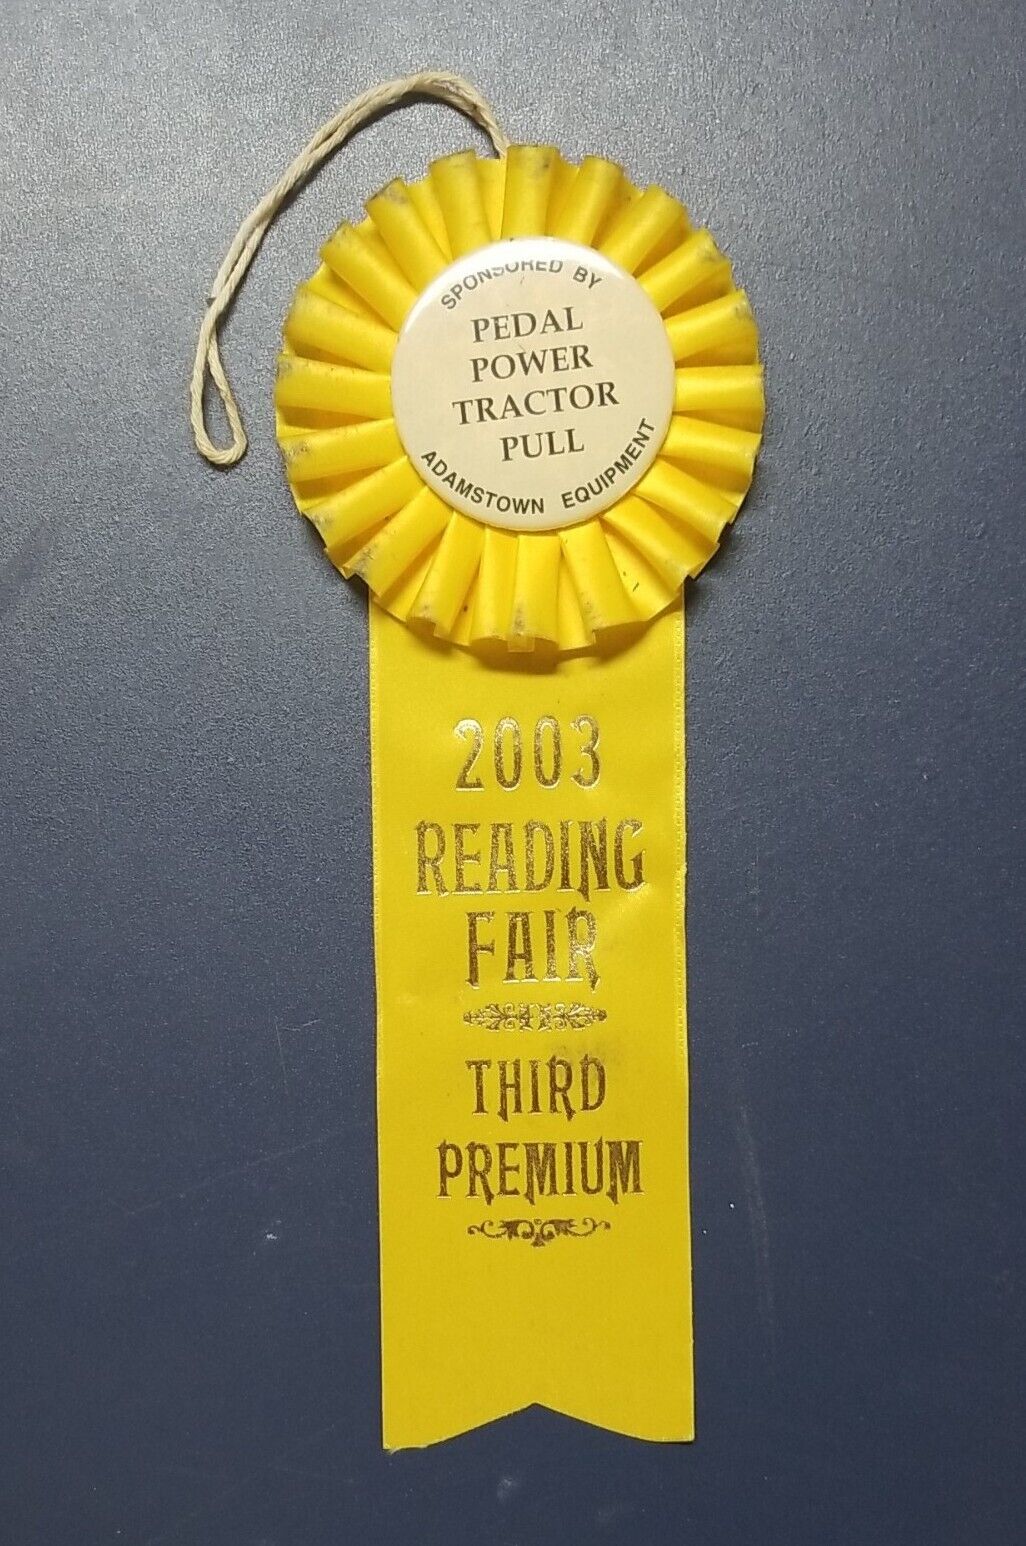 READING FAIR PA 2003 THIRD PREMIUM PRIZE YELLOW RIBBON PEDAL POWER TRACTOR PULL